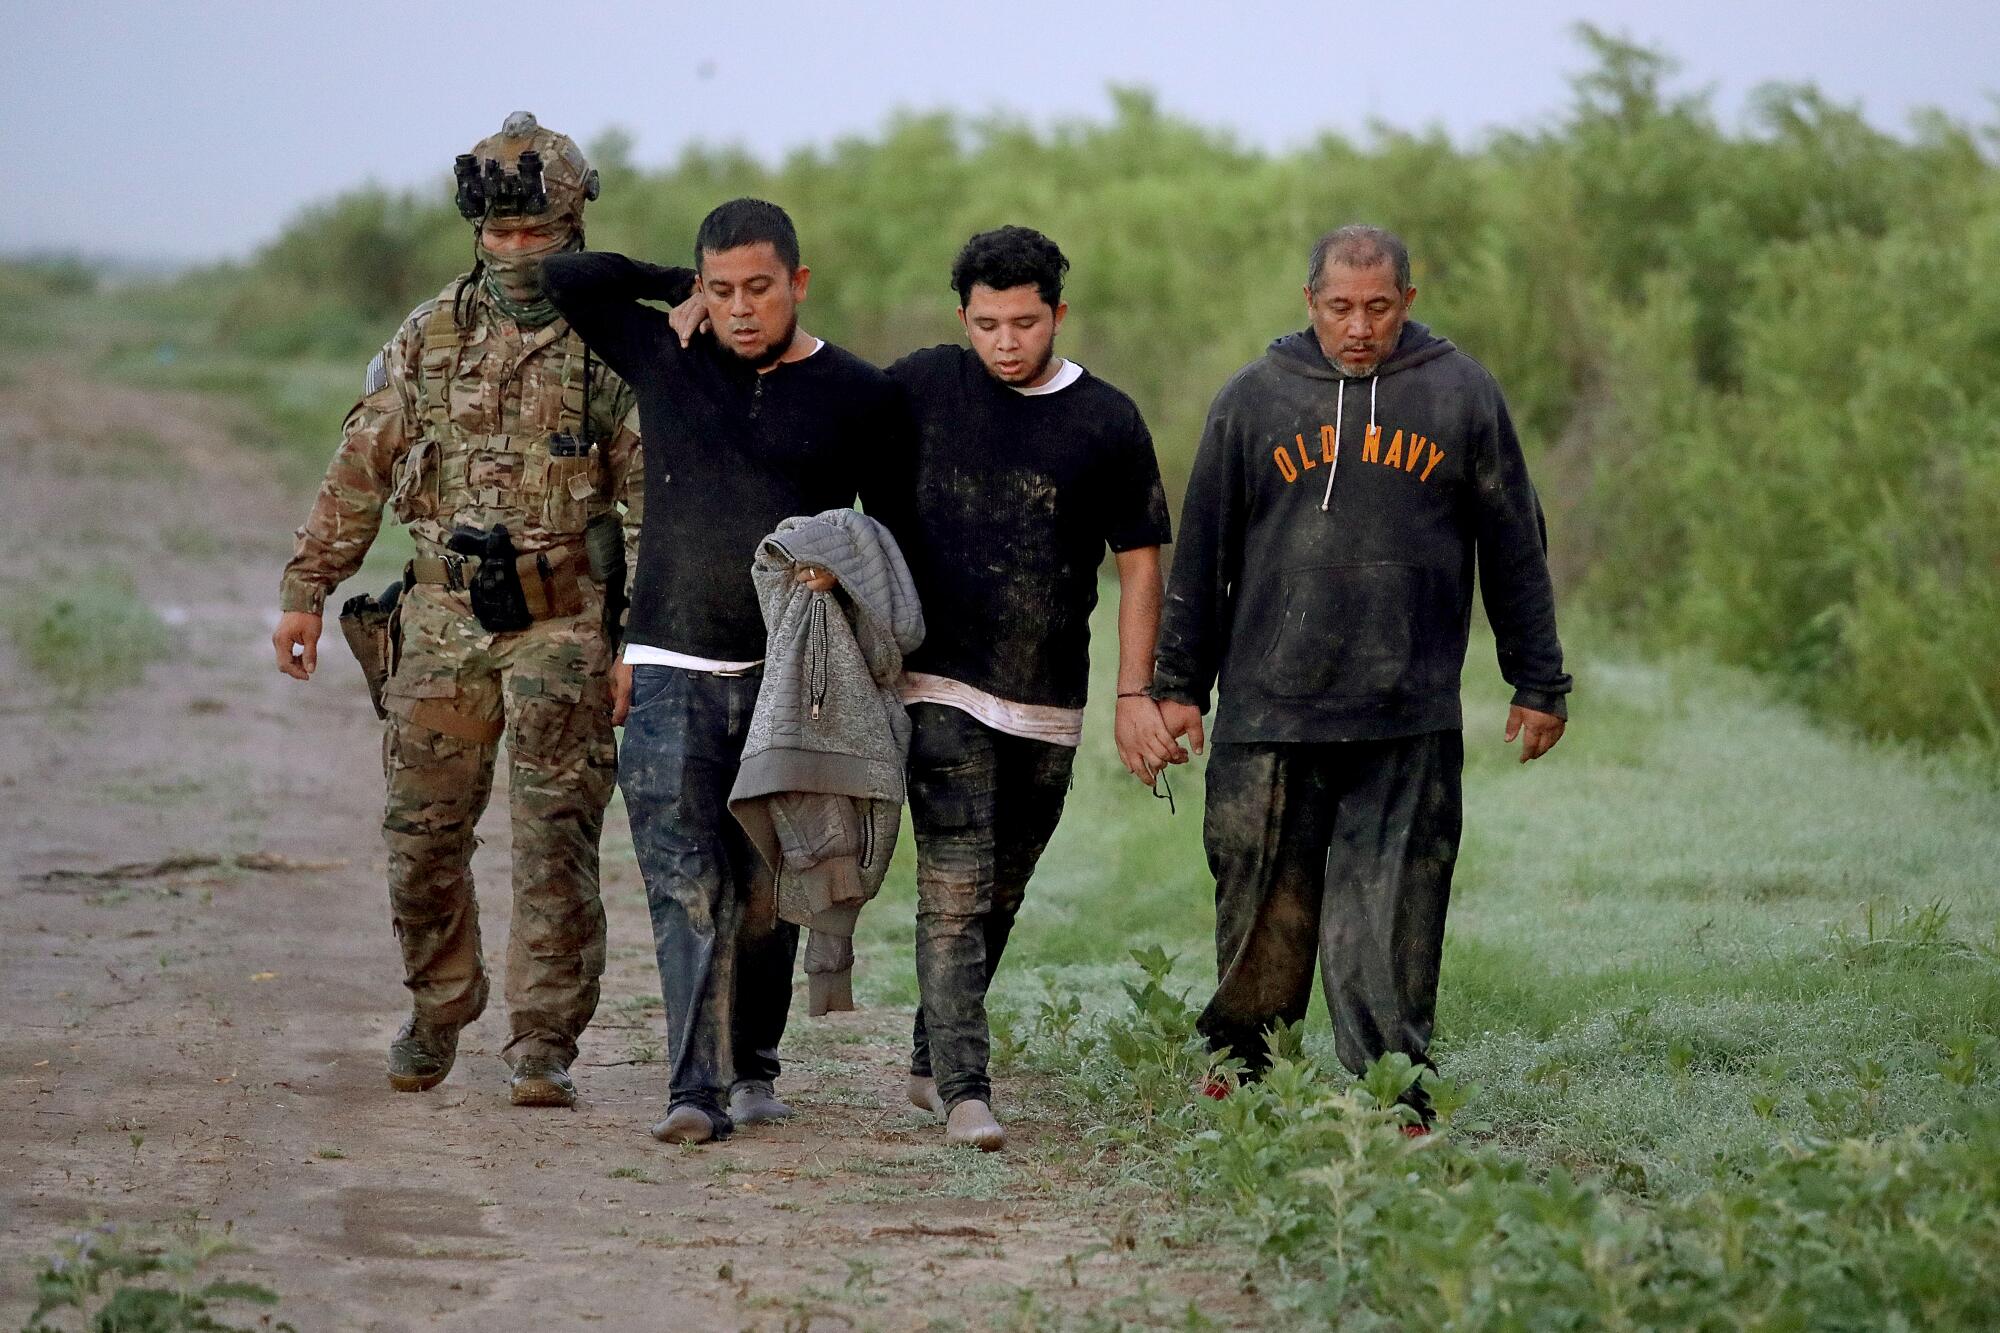 A man in fatigues walks next to three other men in muddy clothes who are handcuffed